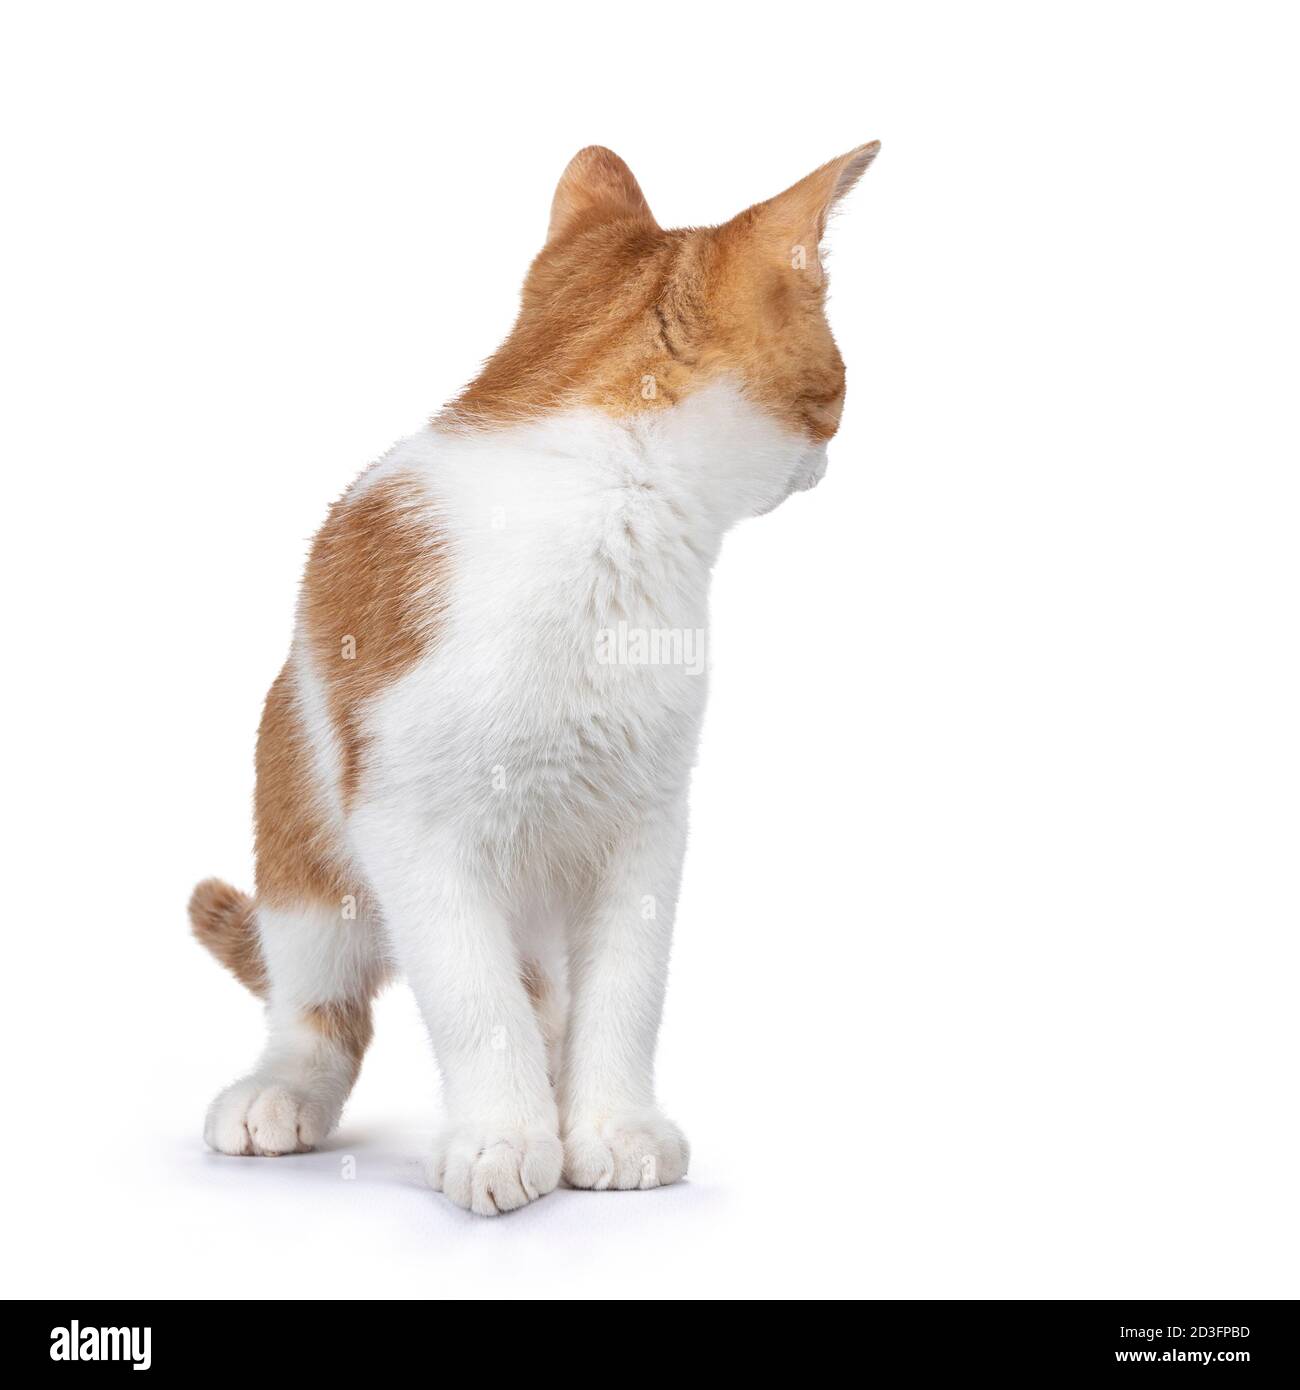 Cute young red with white non breed cat, standing facing front. Head turned looking behind it. Isolated on a white background. Stock Photo